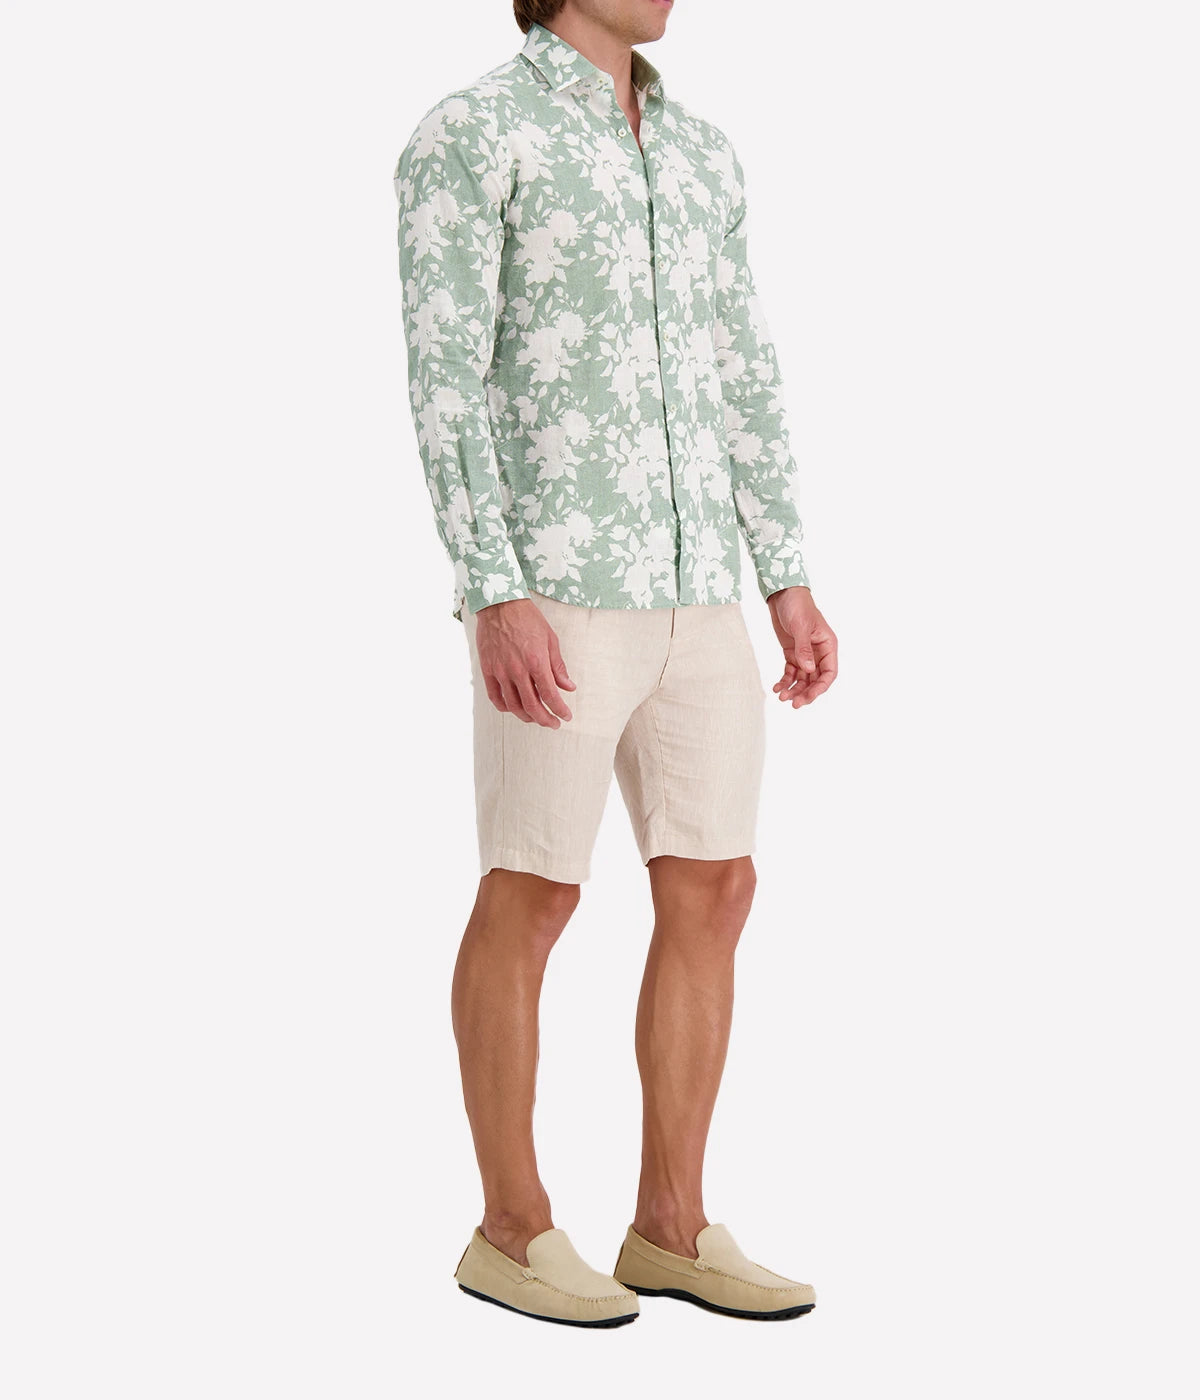 Slim Fit Linen Shirt in Green Floral